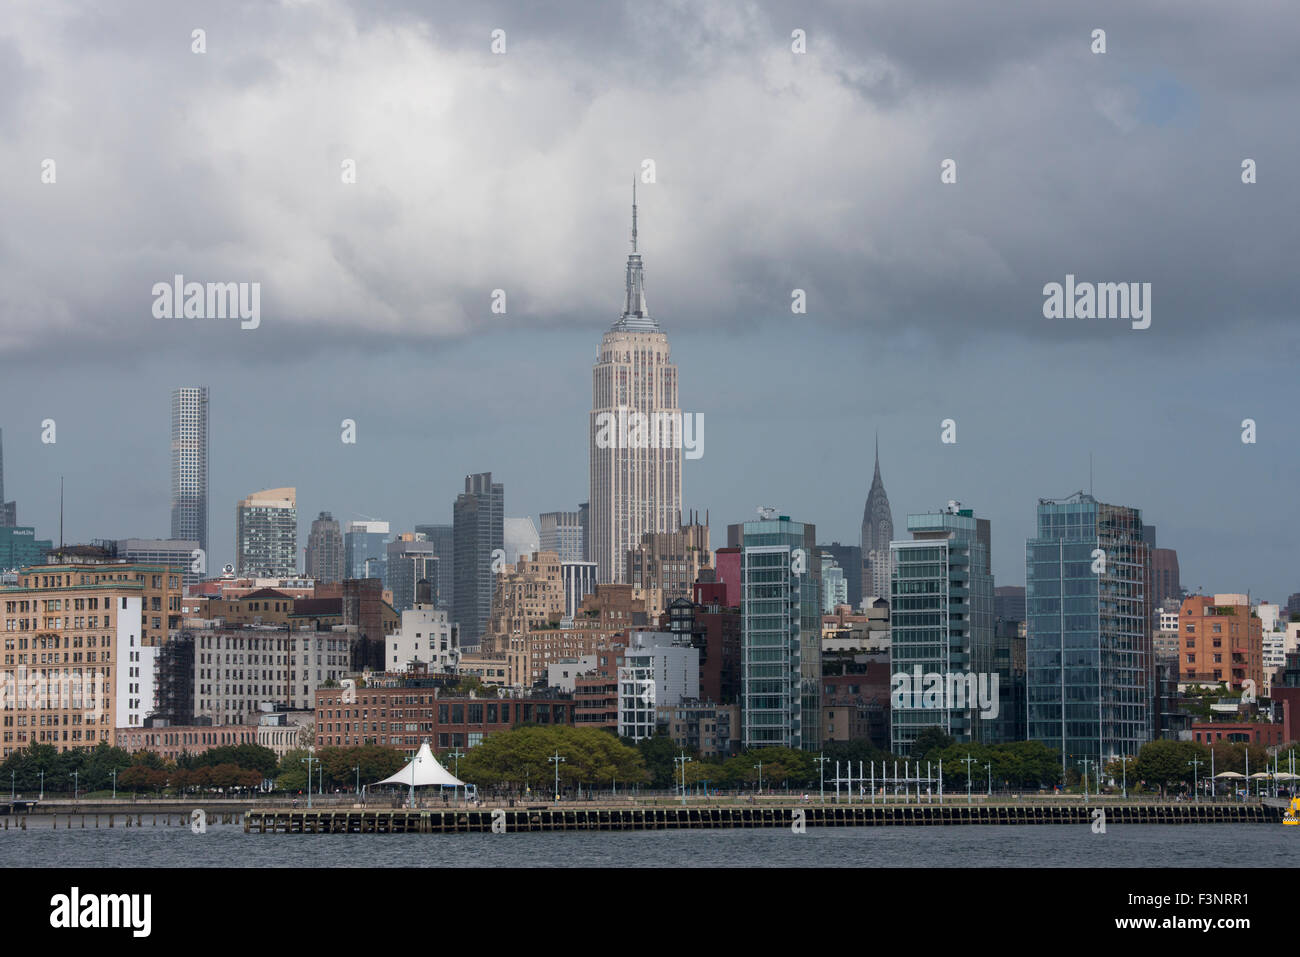 New York, New York City. Hudson River view of Battery Park and Empire State Building city skyline. Stock Photo